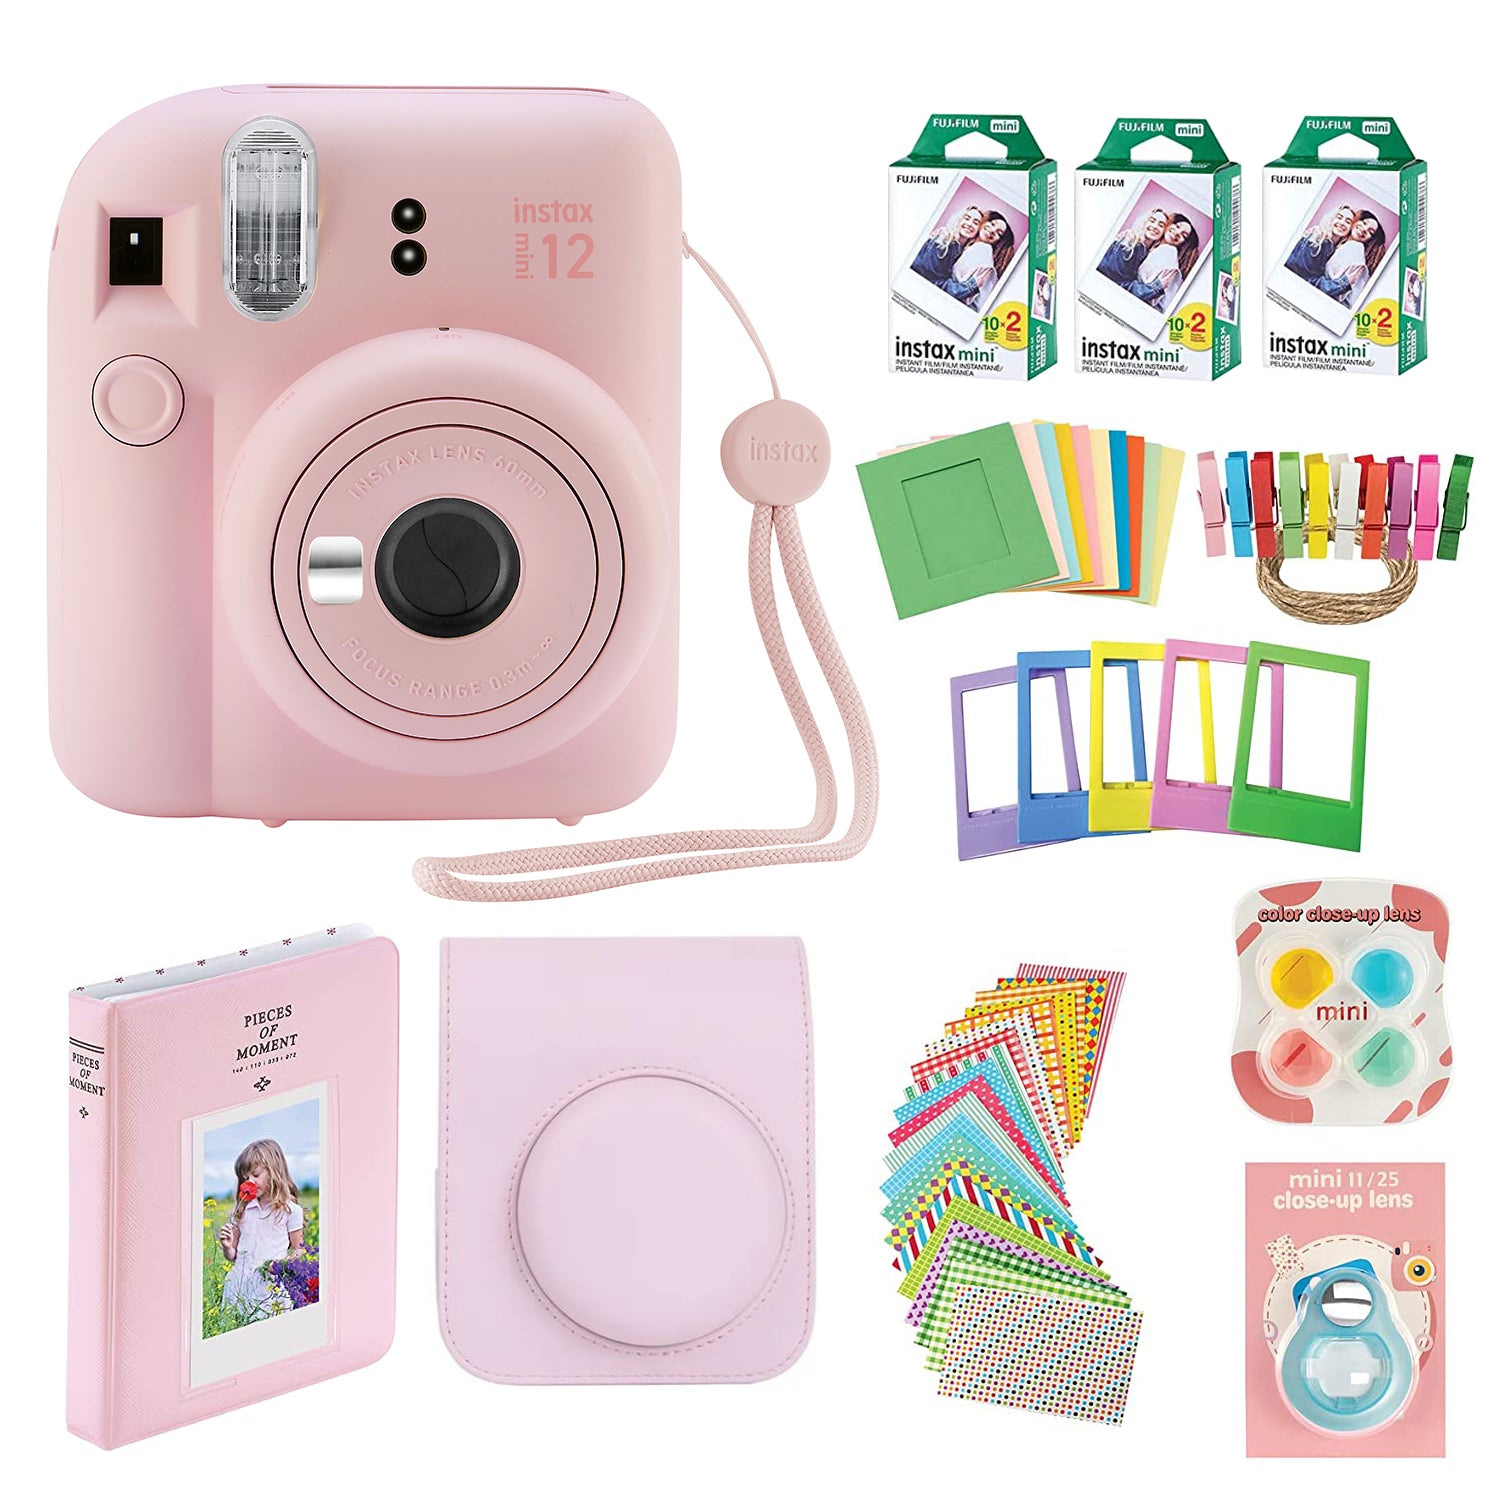 Fujifilm Instax Mini 12 Instant Camera with Case, 60 Fuji Films, Decoration Stickers, Frames, Photo Album and More Accessory kit (Blush Pink)